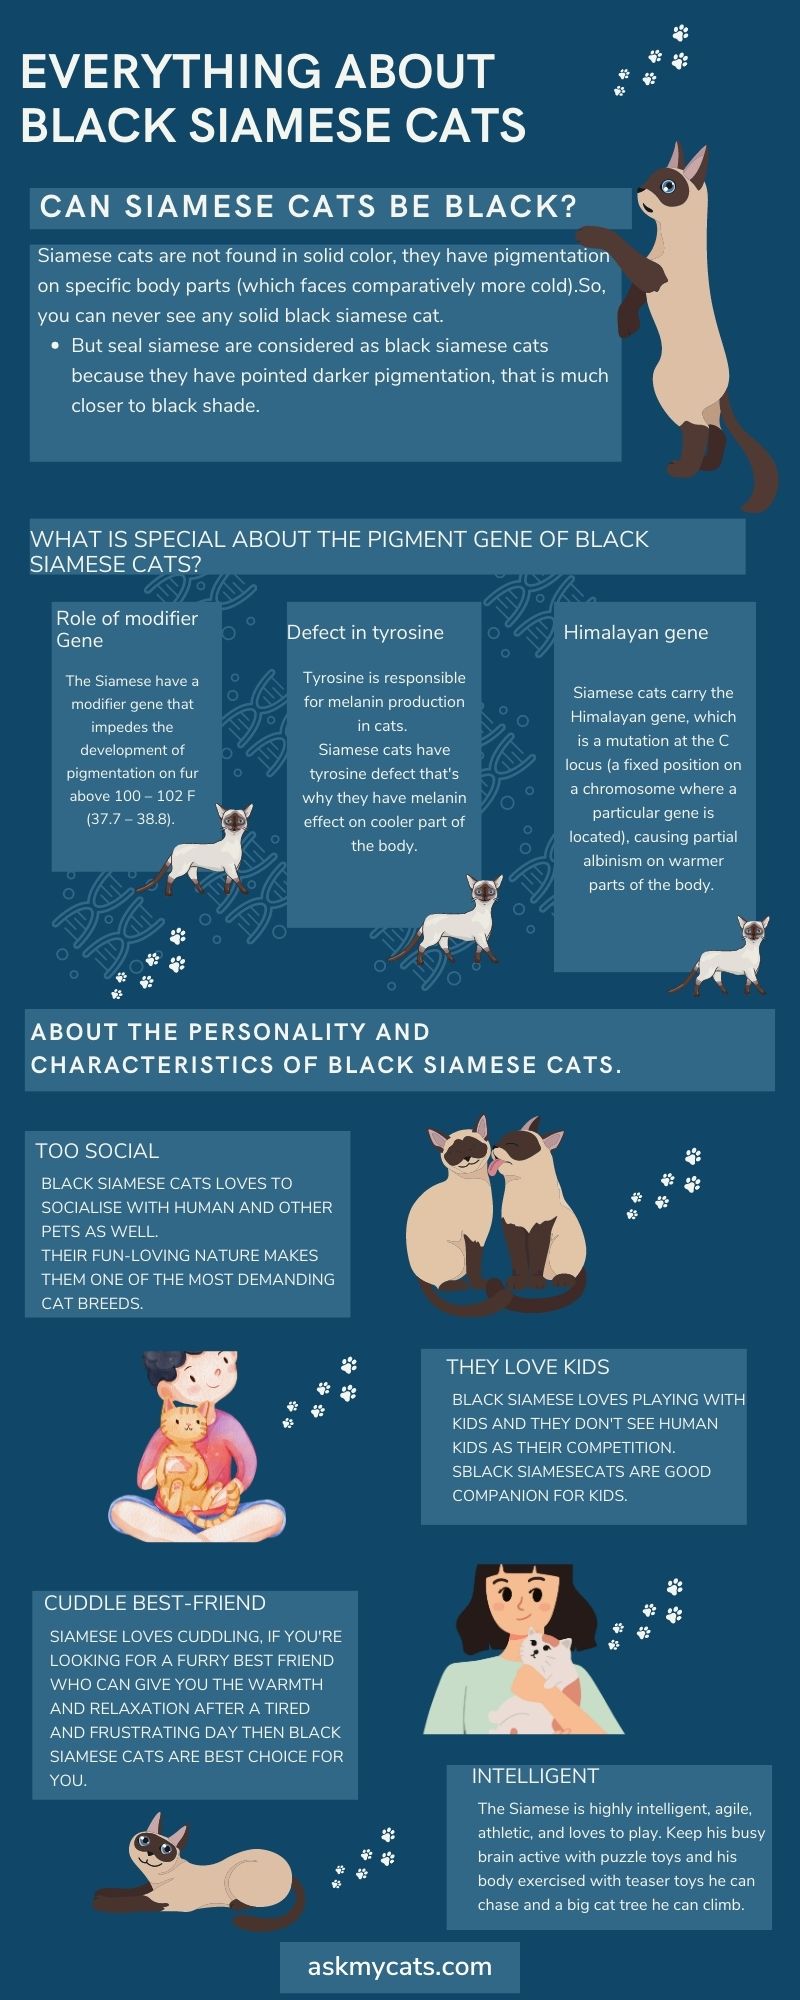 EVERYTHING ABOUT BLACK SIAMESE CATS